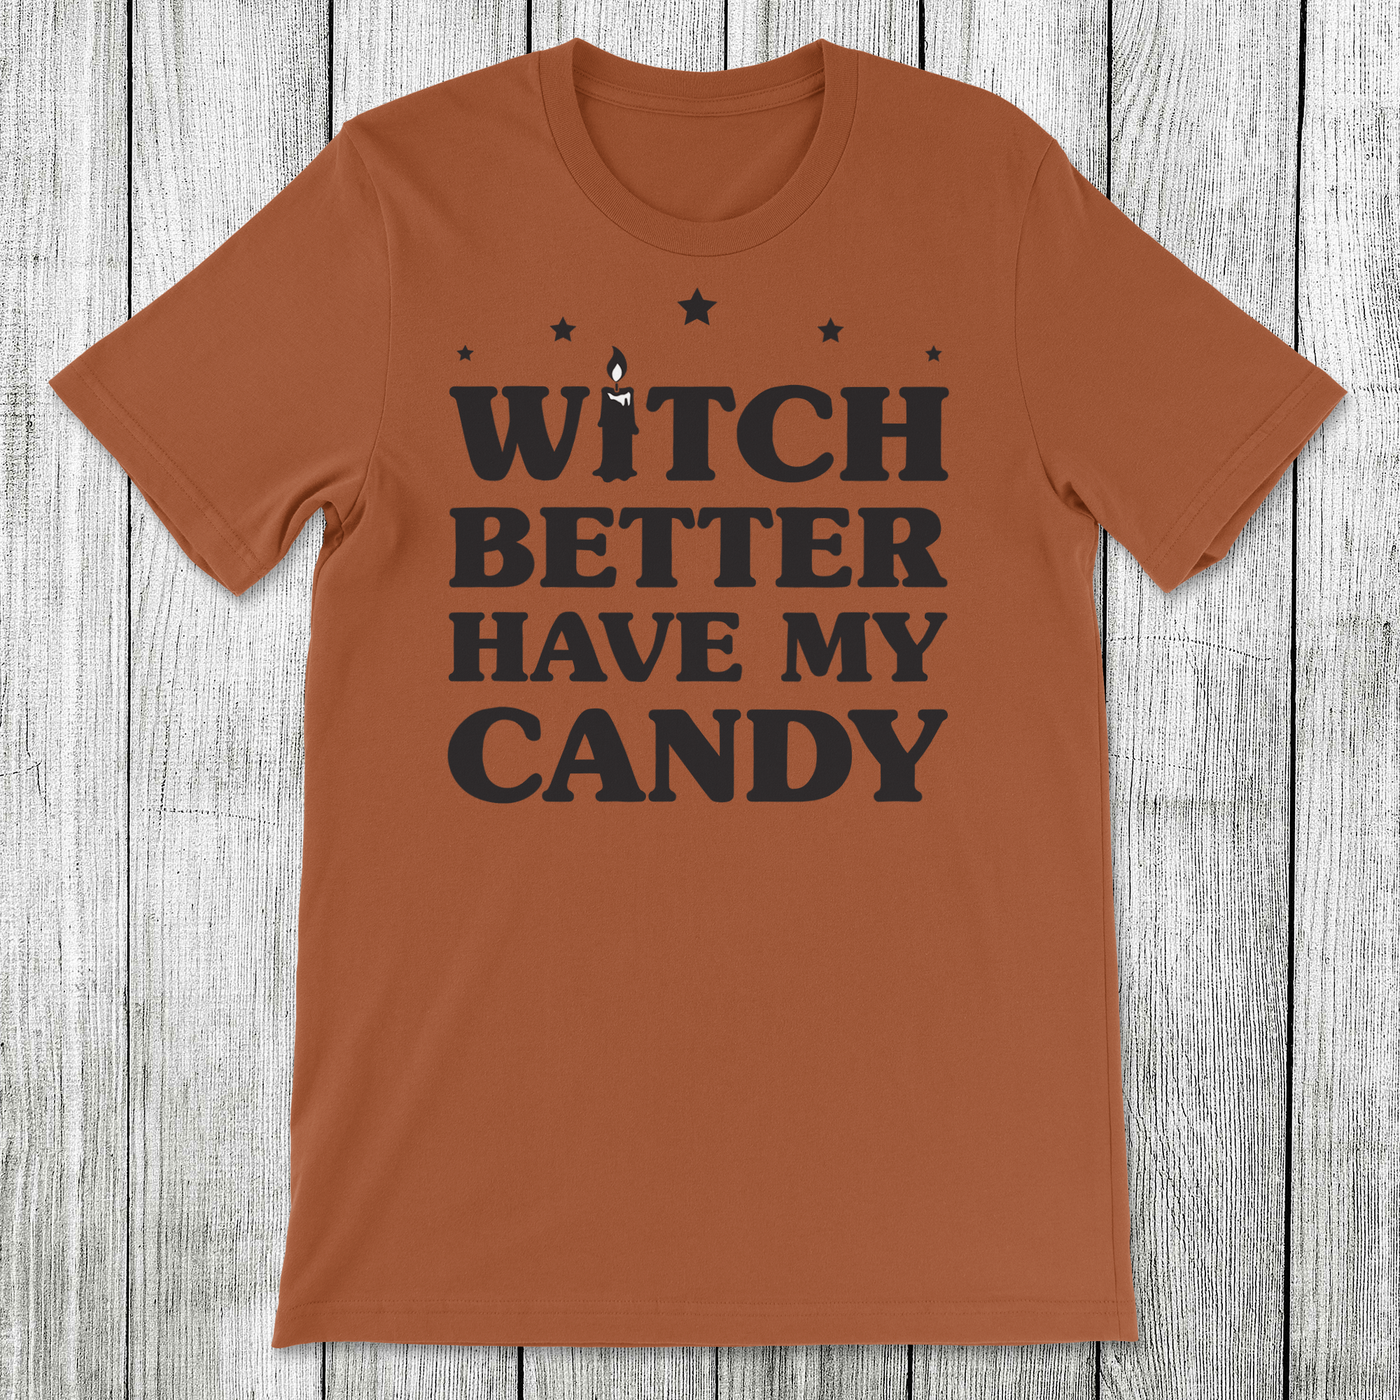 Daydream Tees Witch Better Have My Candy